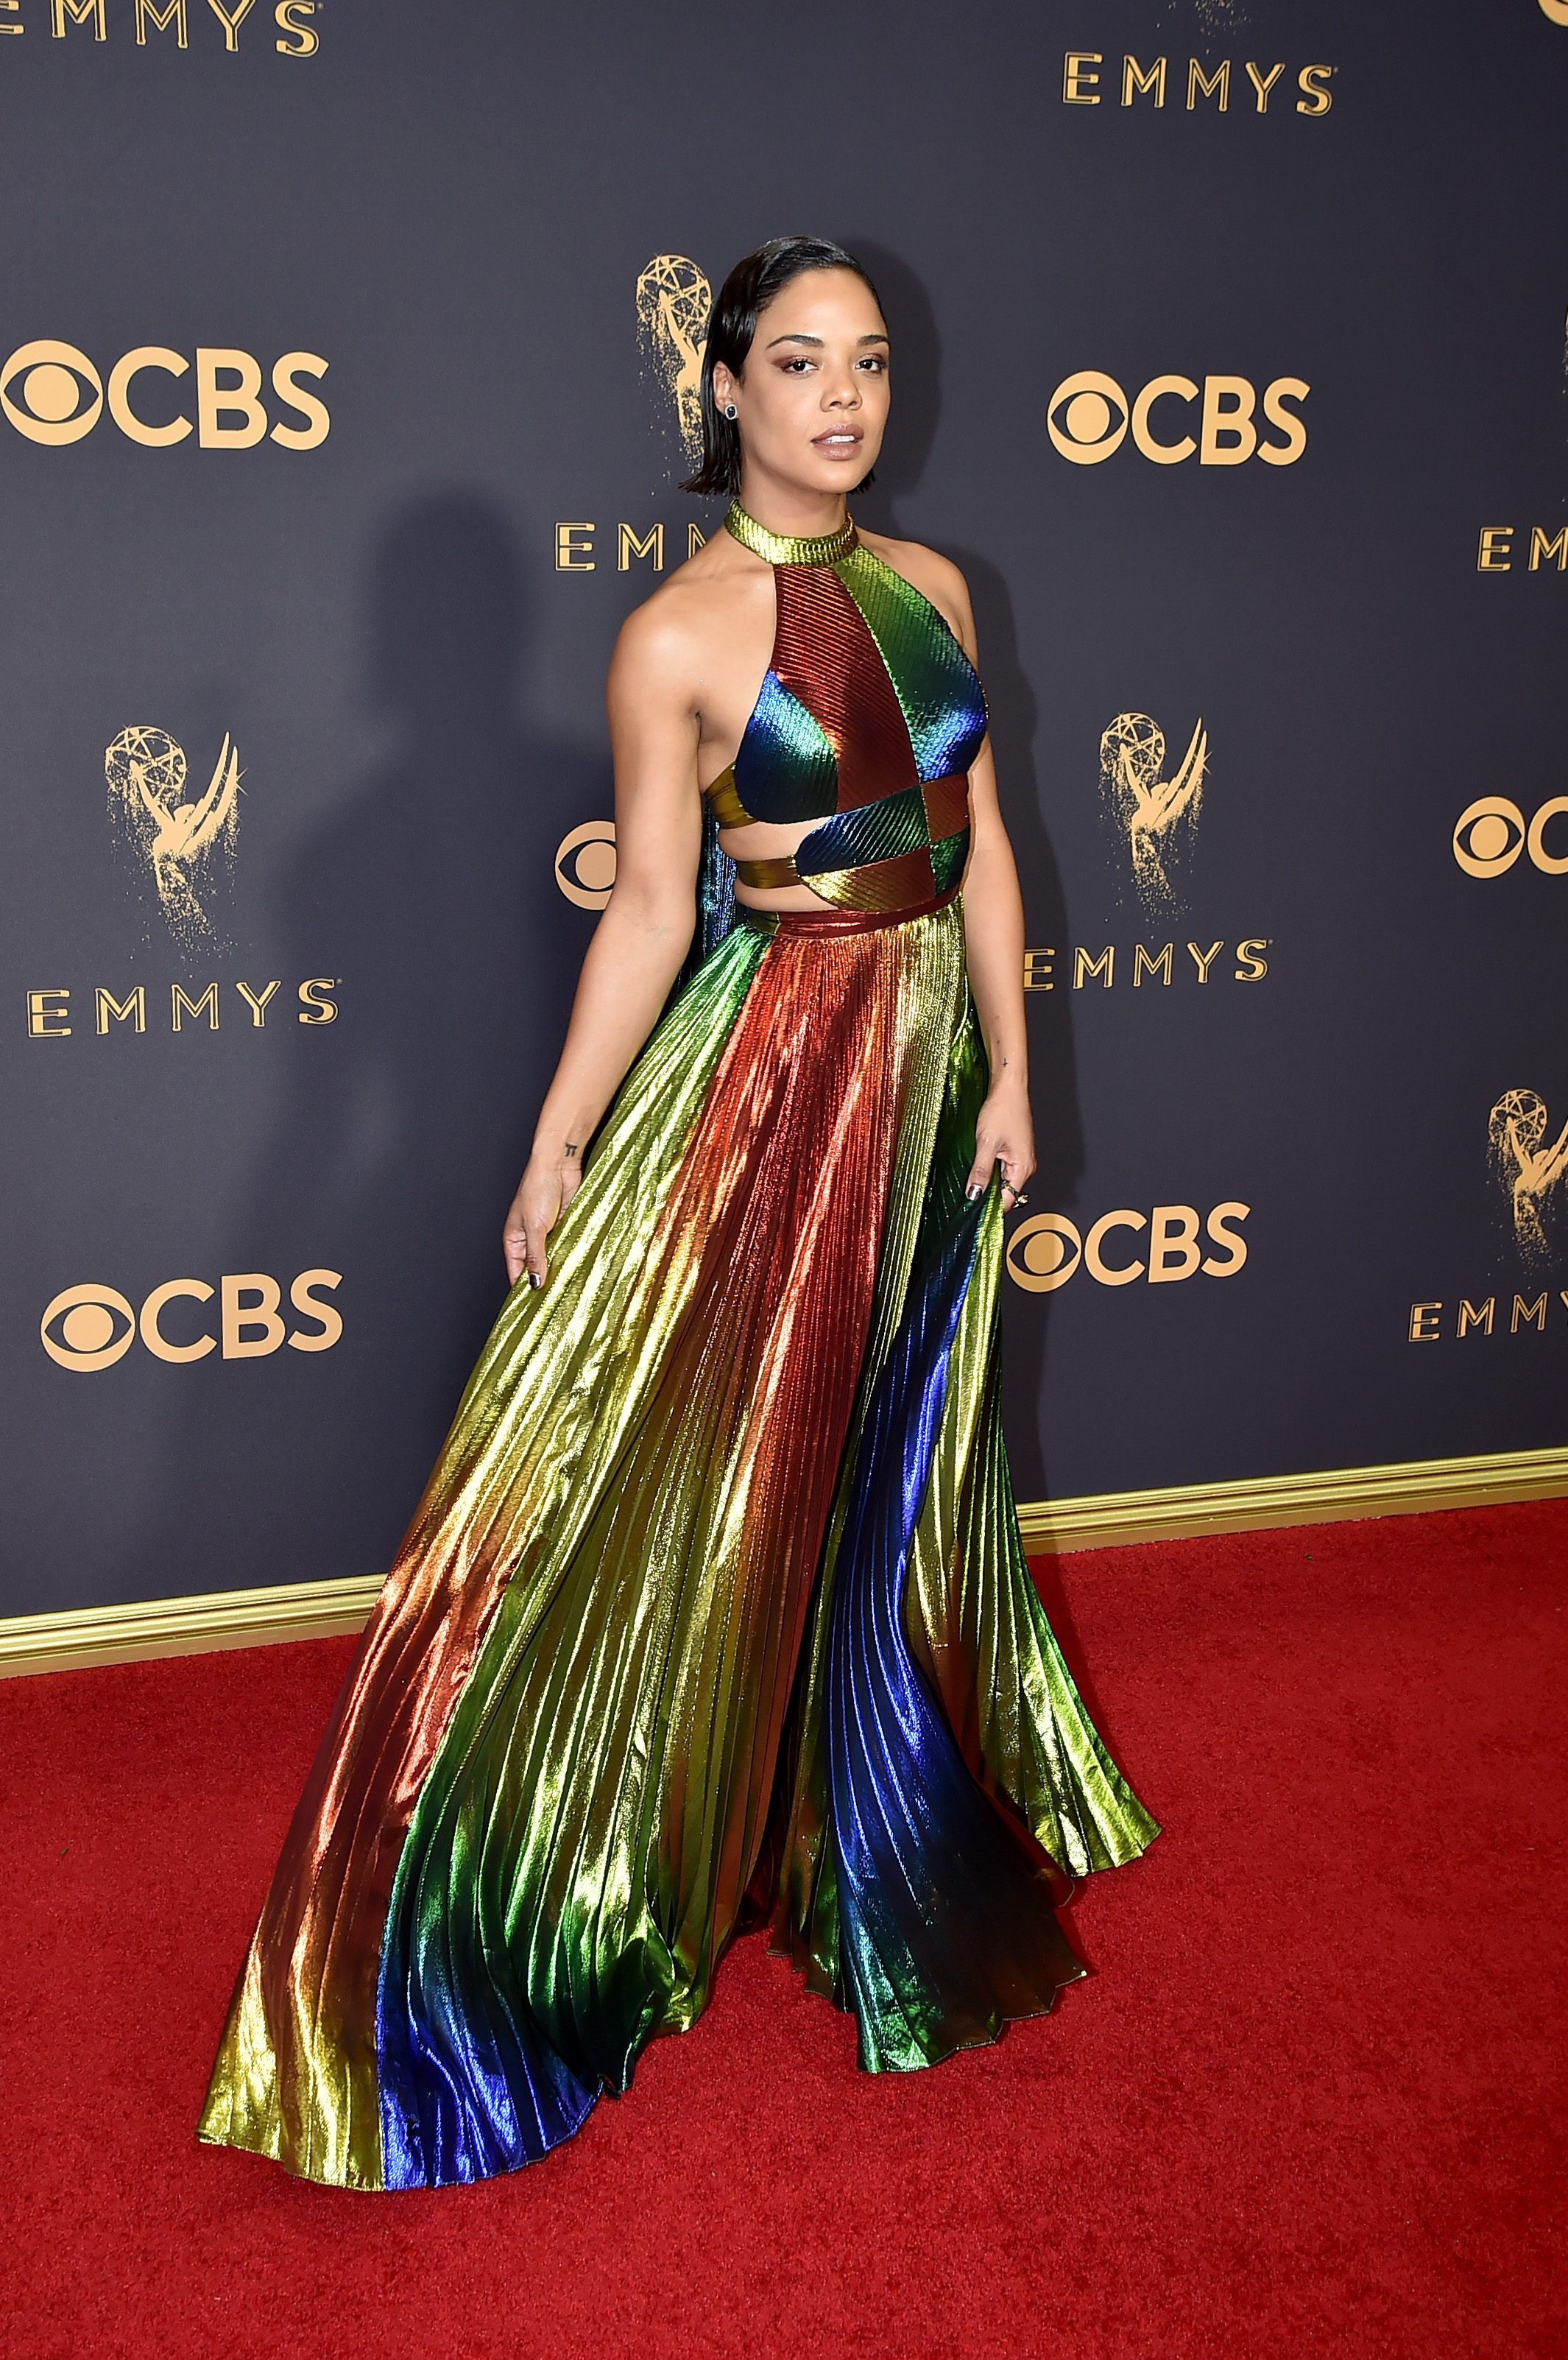 Actor Tessa Thompson attends the 69th Annual Primetime Emmy Awards at Microsoft Theater on September 17, 2017 in Los Angeles, California.